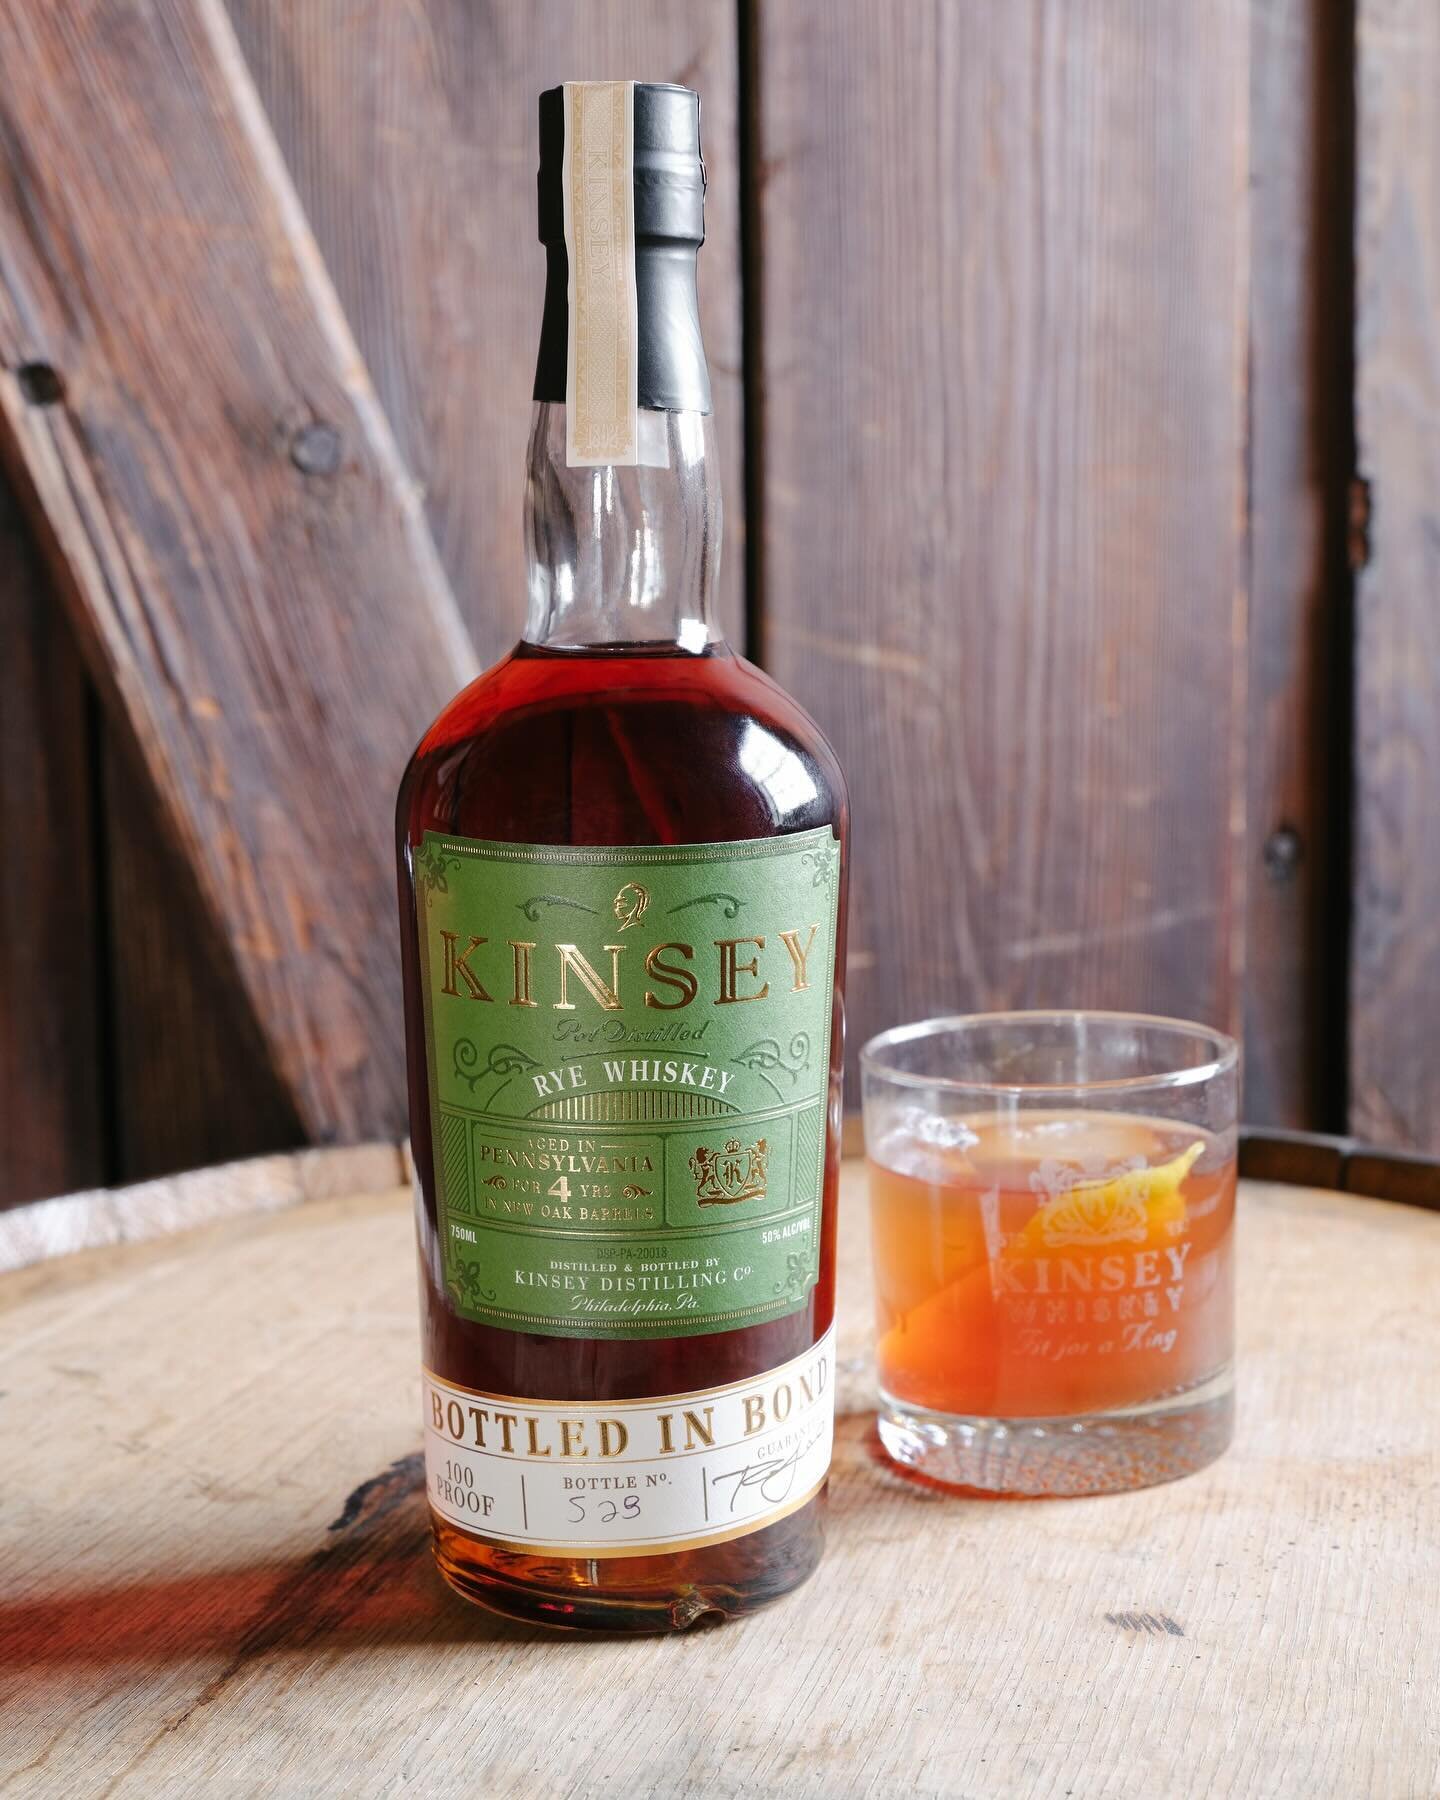 🚨Last Call on these two New Liberty favorites!🚨

We have very low stock on both our Bottled in Bond Kinsey Rye and American Single Malt so grab yours while you can. Available on our webshop and in person at our second floor Bottle Shop. #NewLiberty